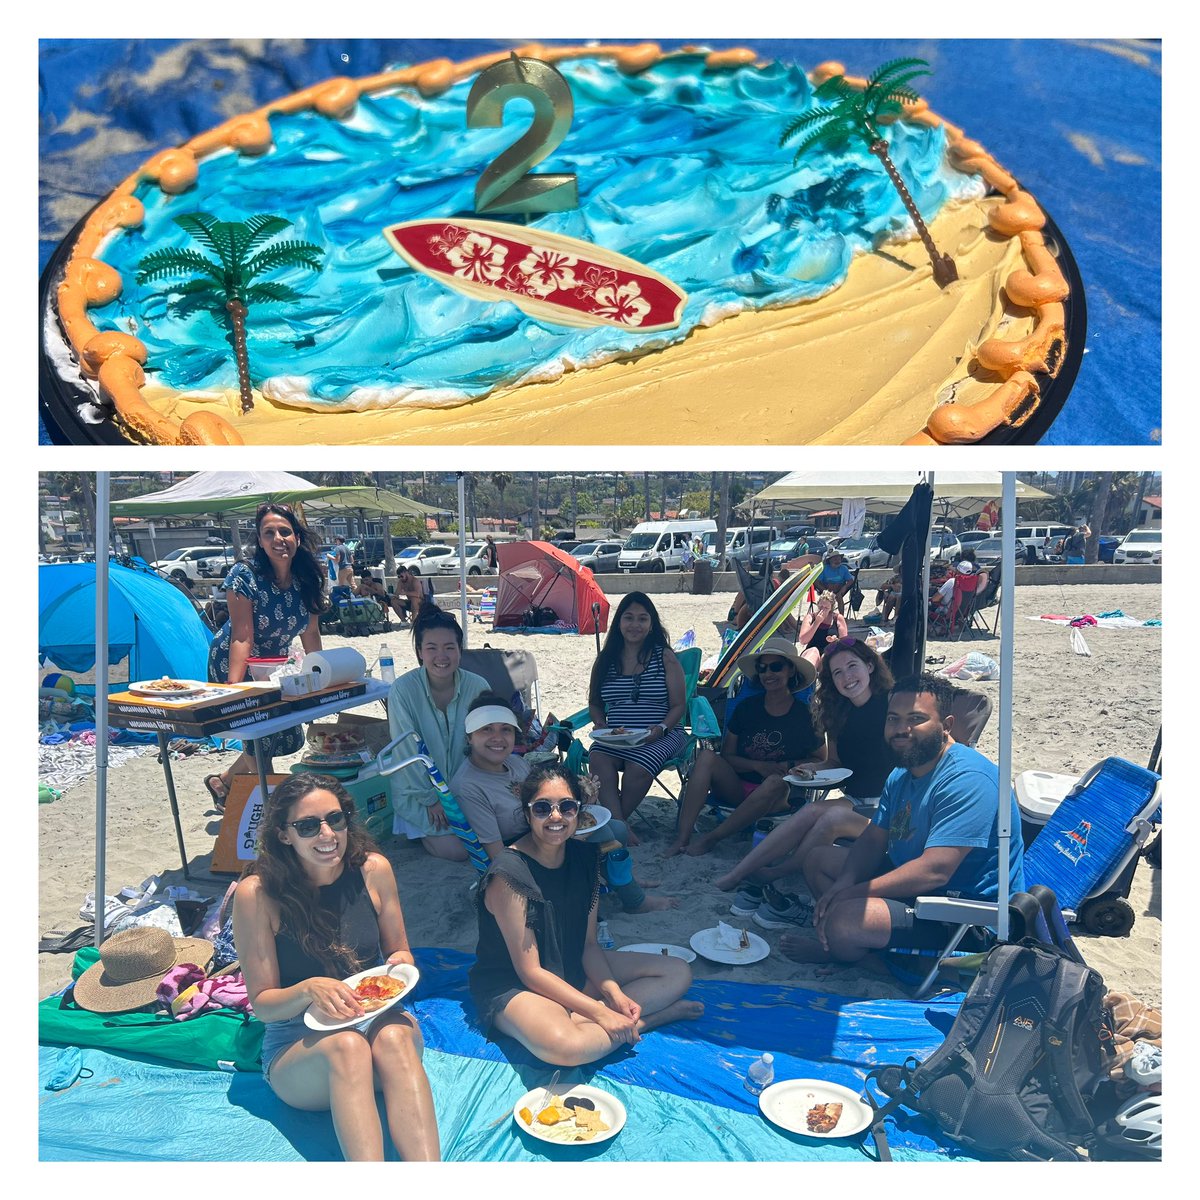 We are officially 2! Such a fun day enjoying some San Diego sun with the lab. Running a lab is a crazy rollercoaster, but my team is the best part!